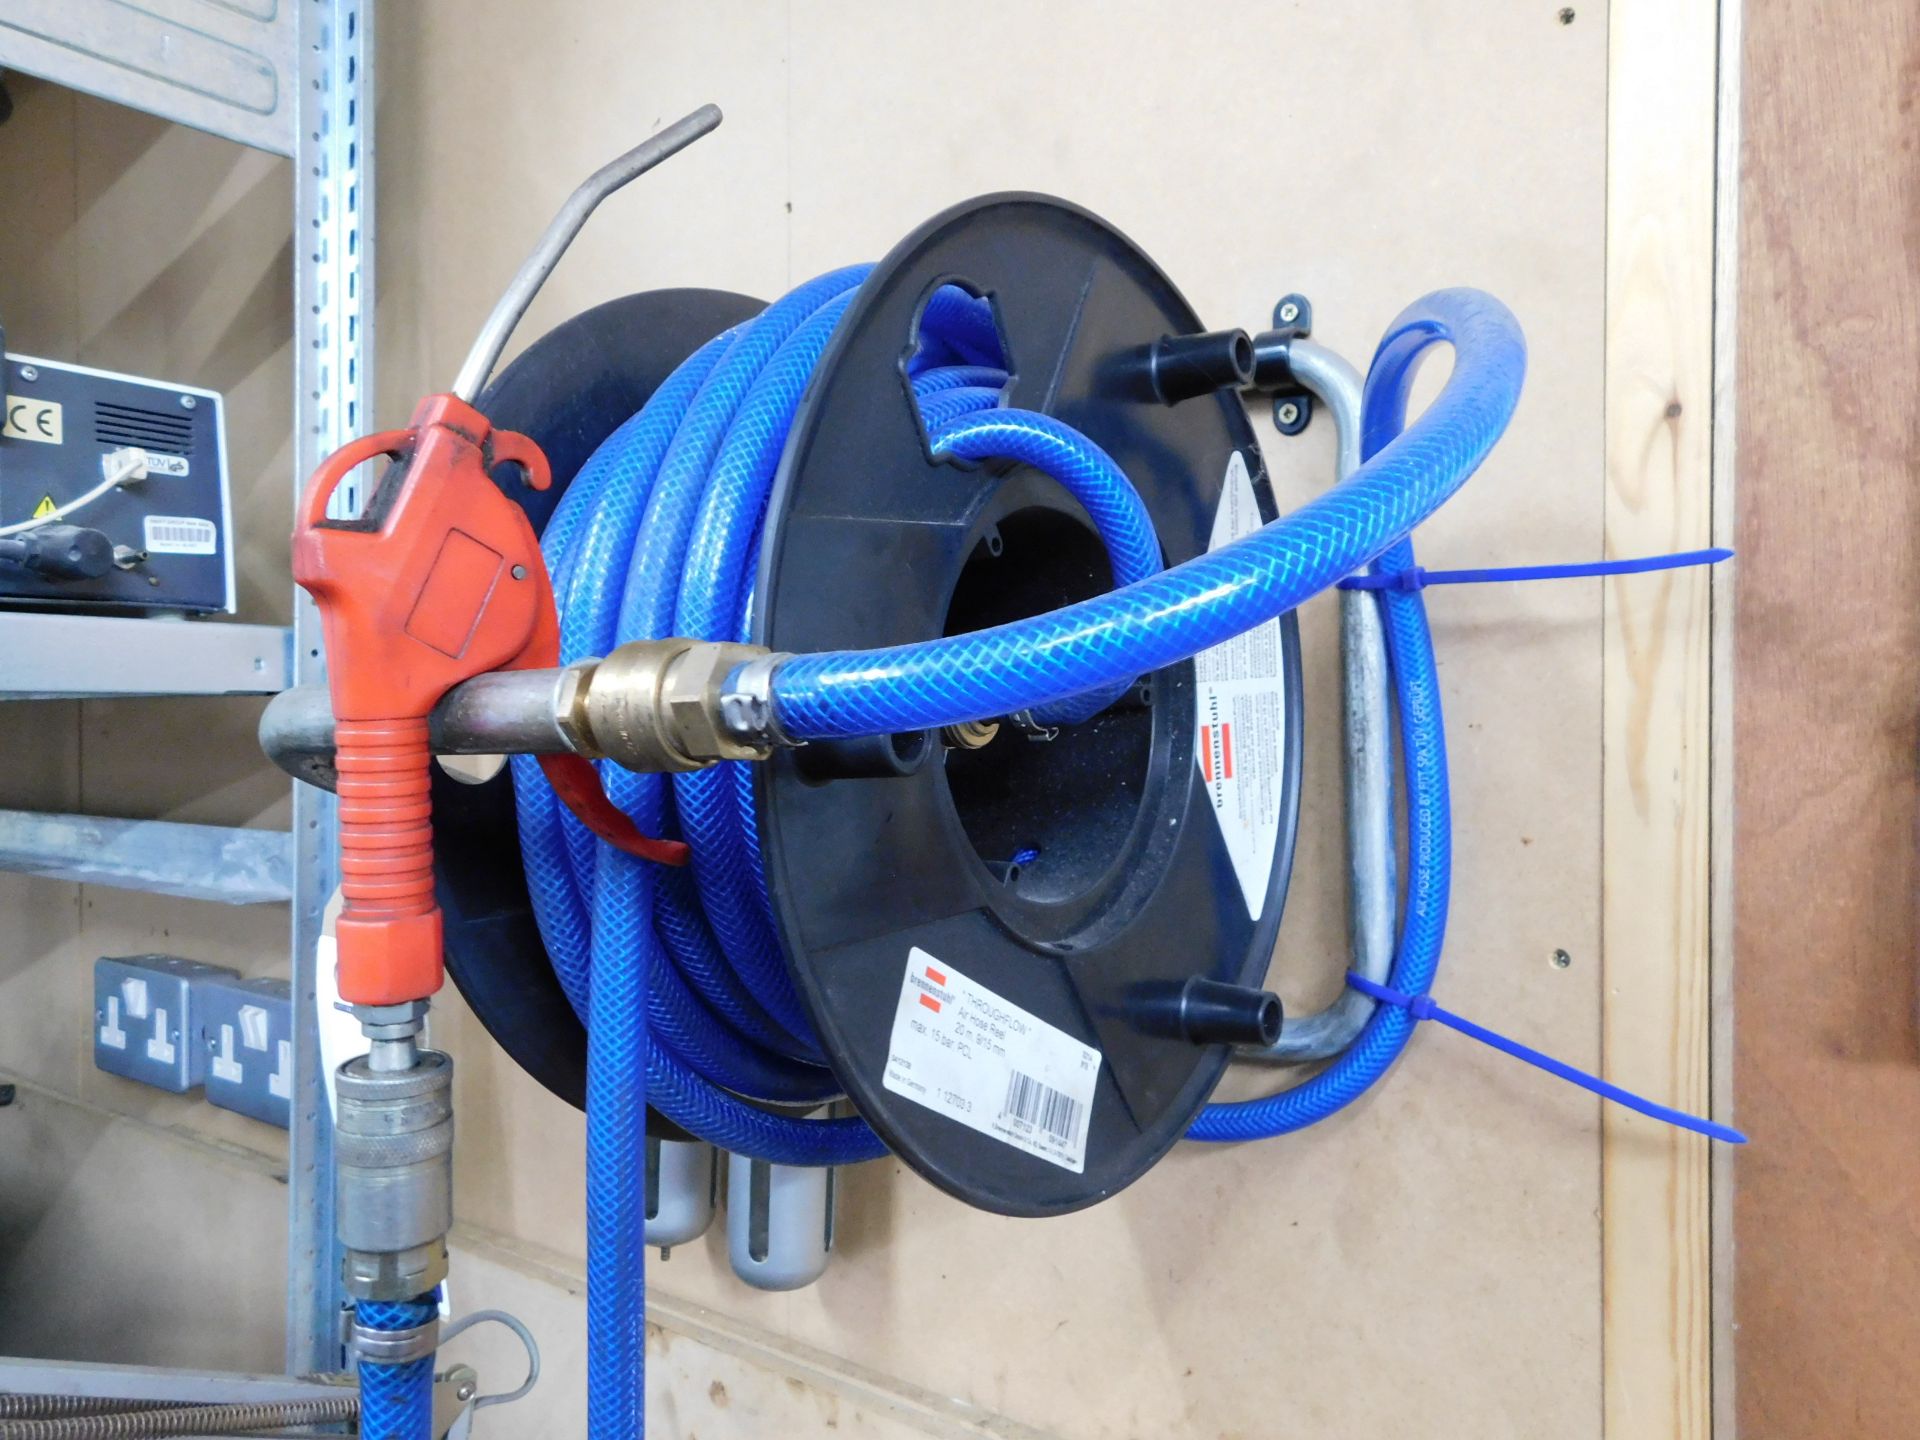 Brennenstuhl Air Hose Reel (Location: Bolton. Please Refer to General Notes)